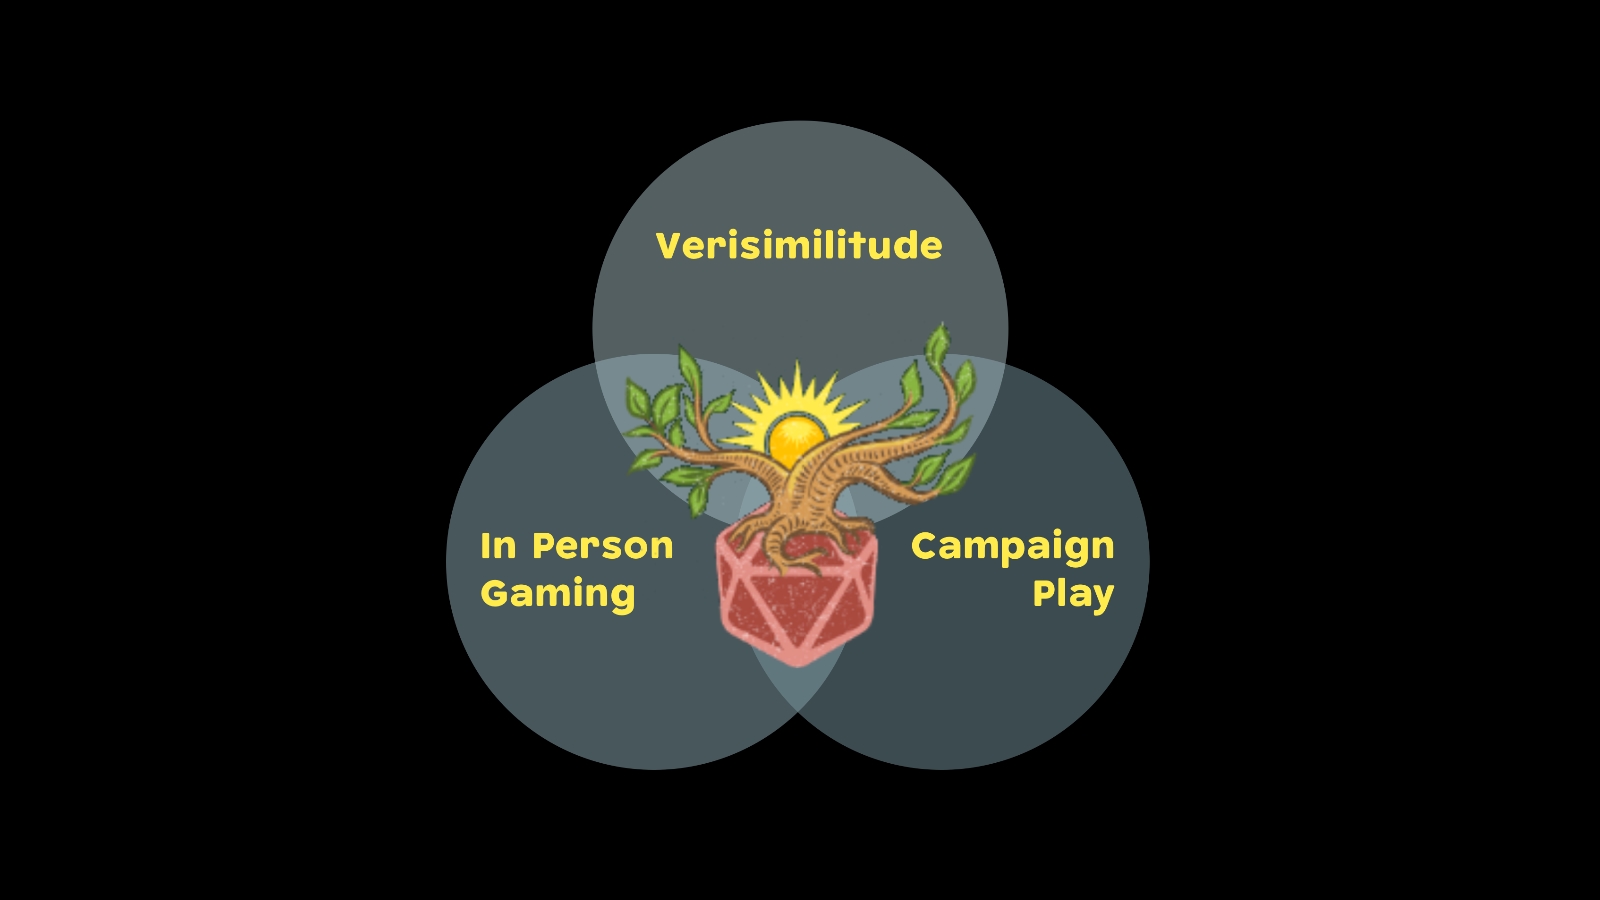 Verisimilitude, campaign play, and gaming in person are at the heart of Setting First